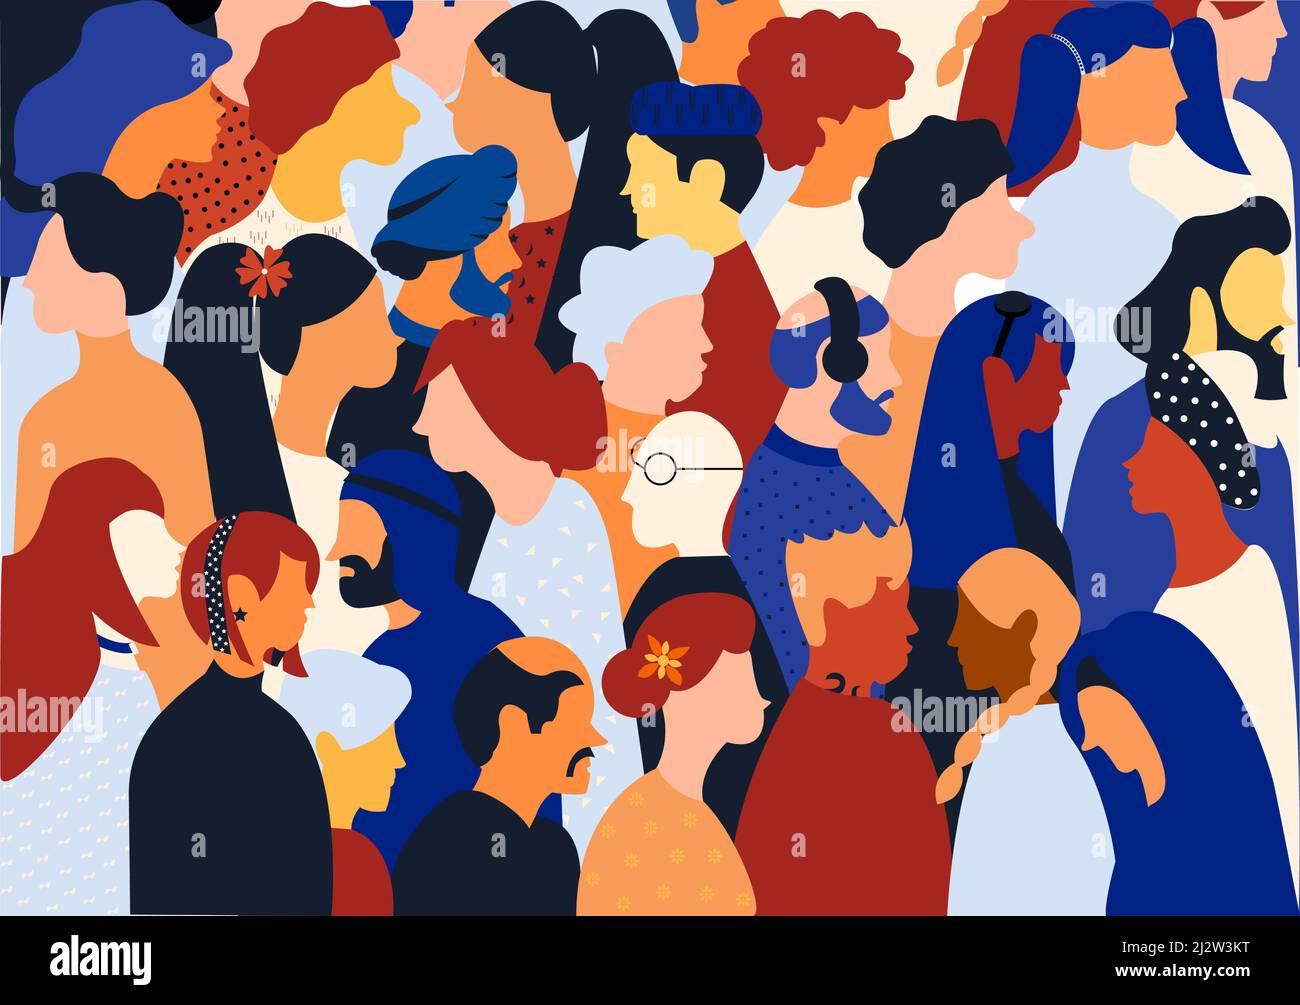 Flat illustration of a crowd containing inclusive and diversified people all together without any difference. Stock Vector